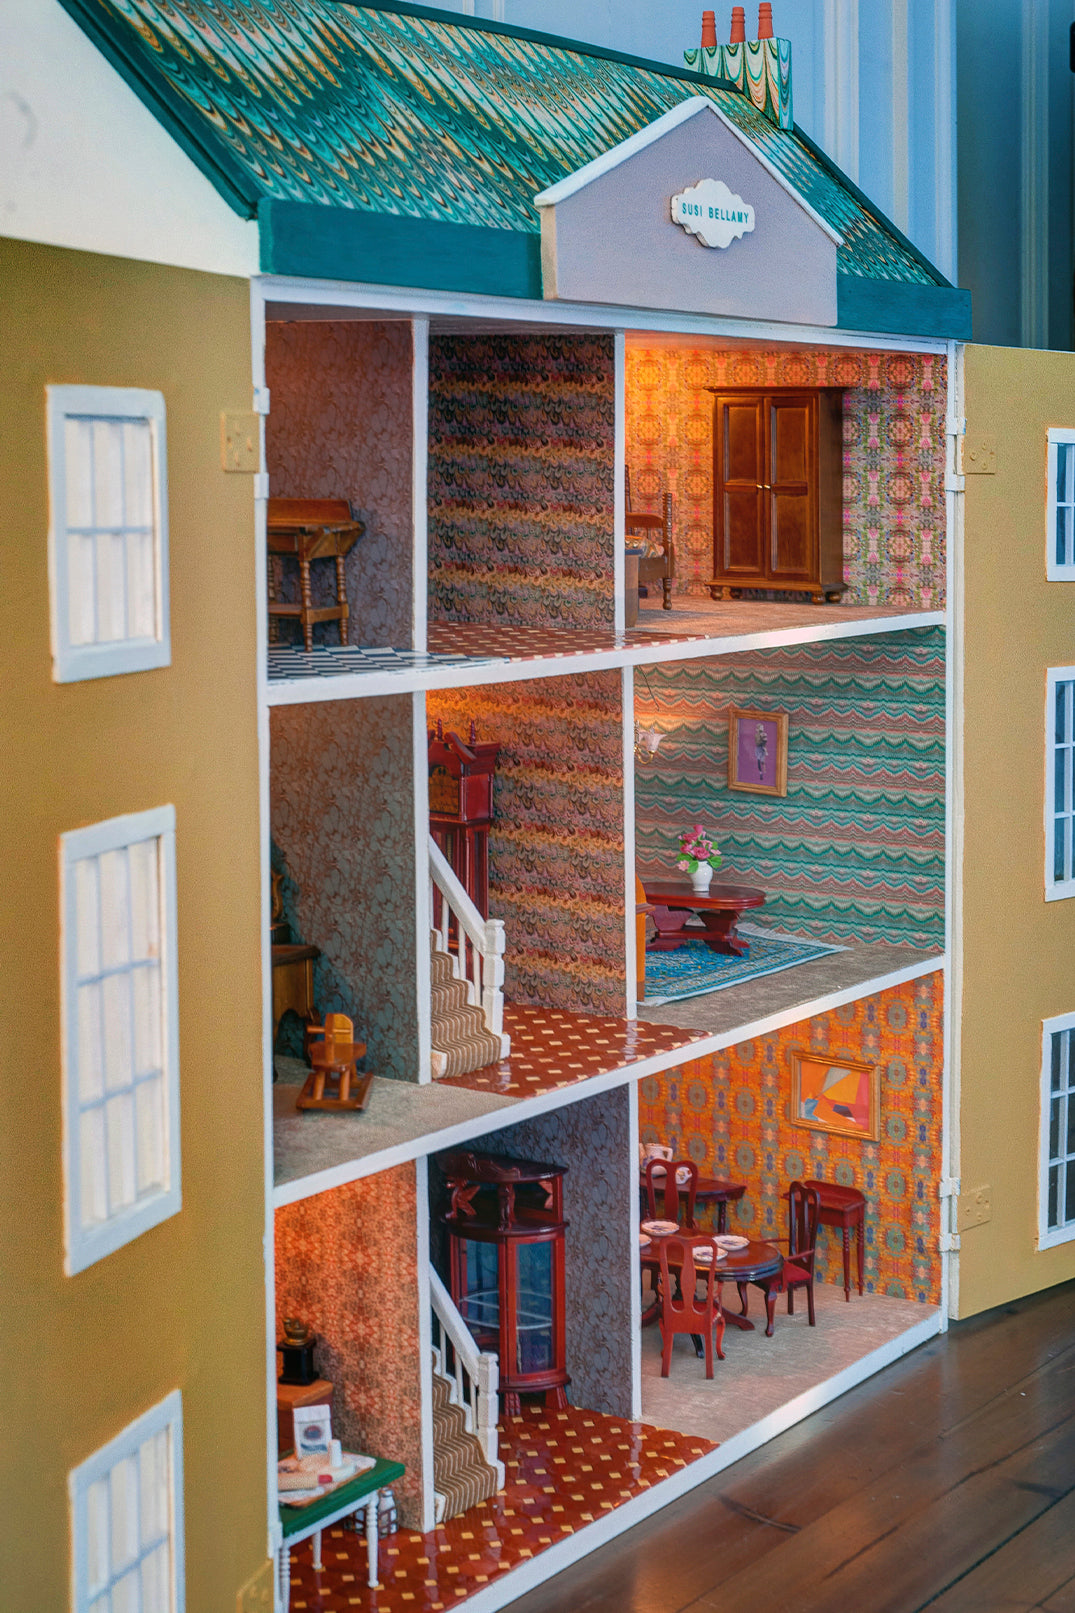 Inside Our Dolls House